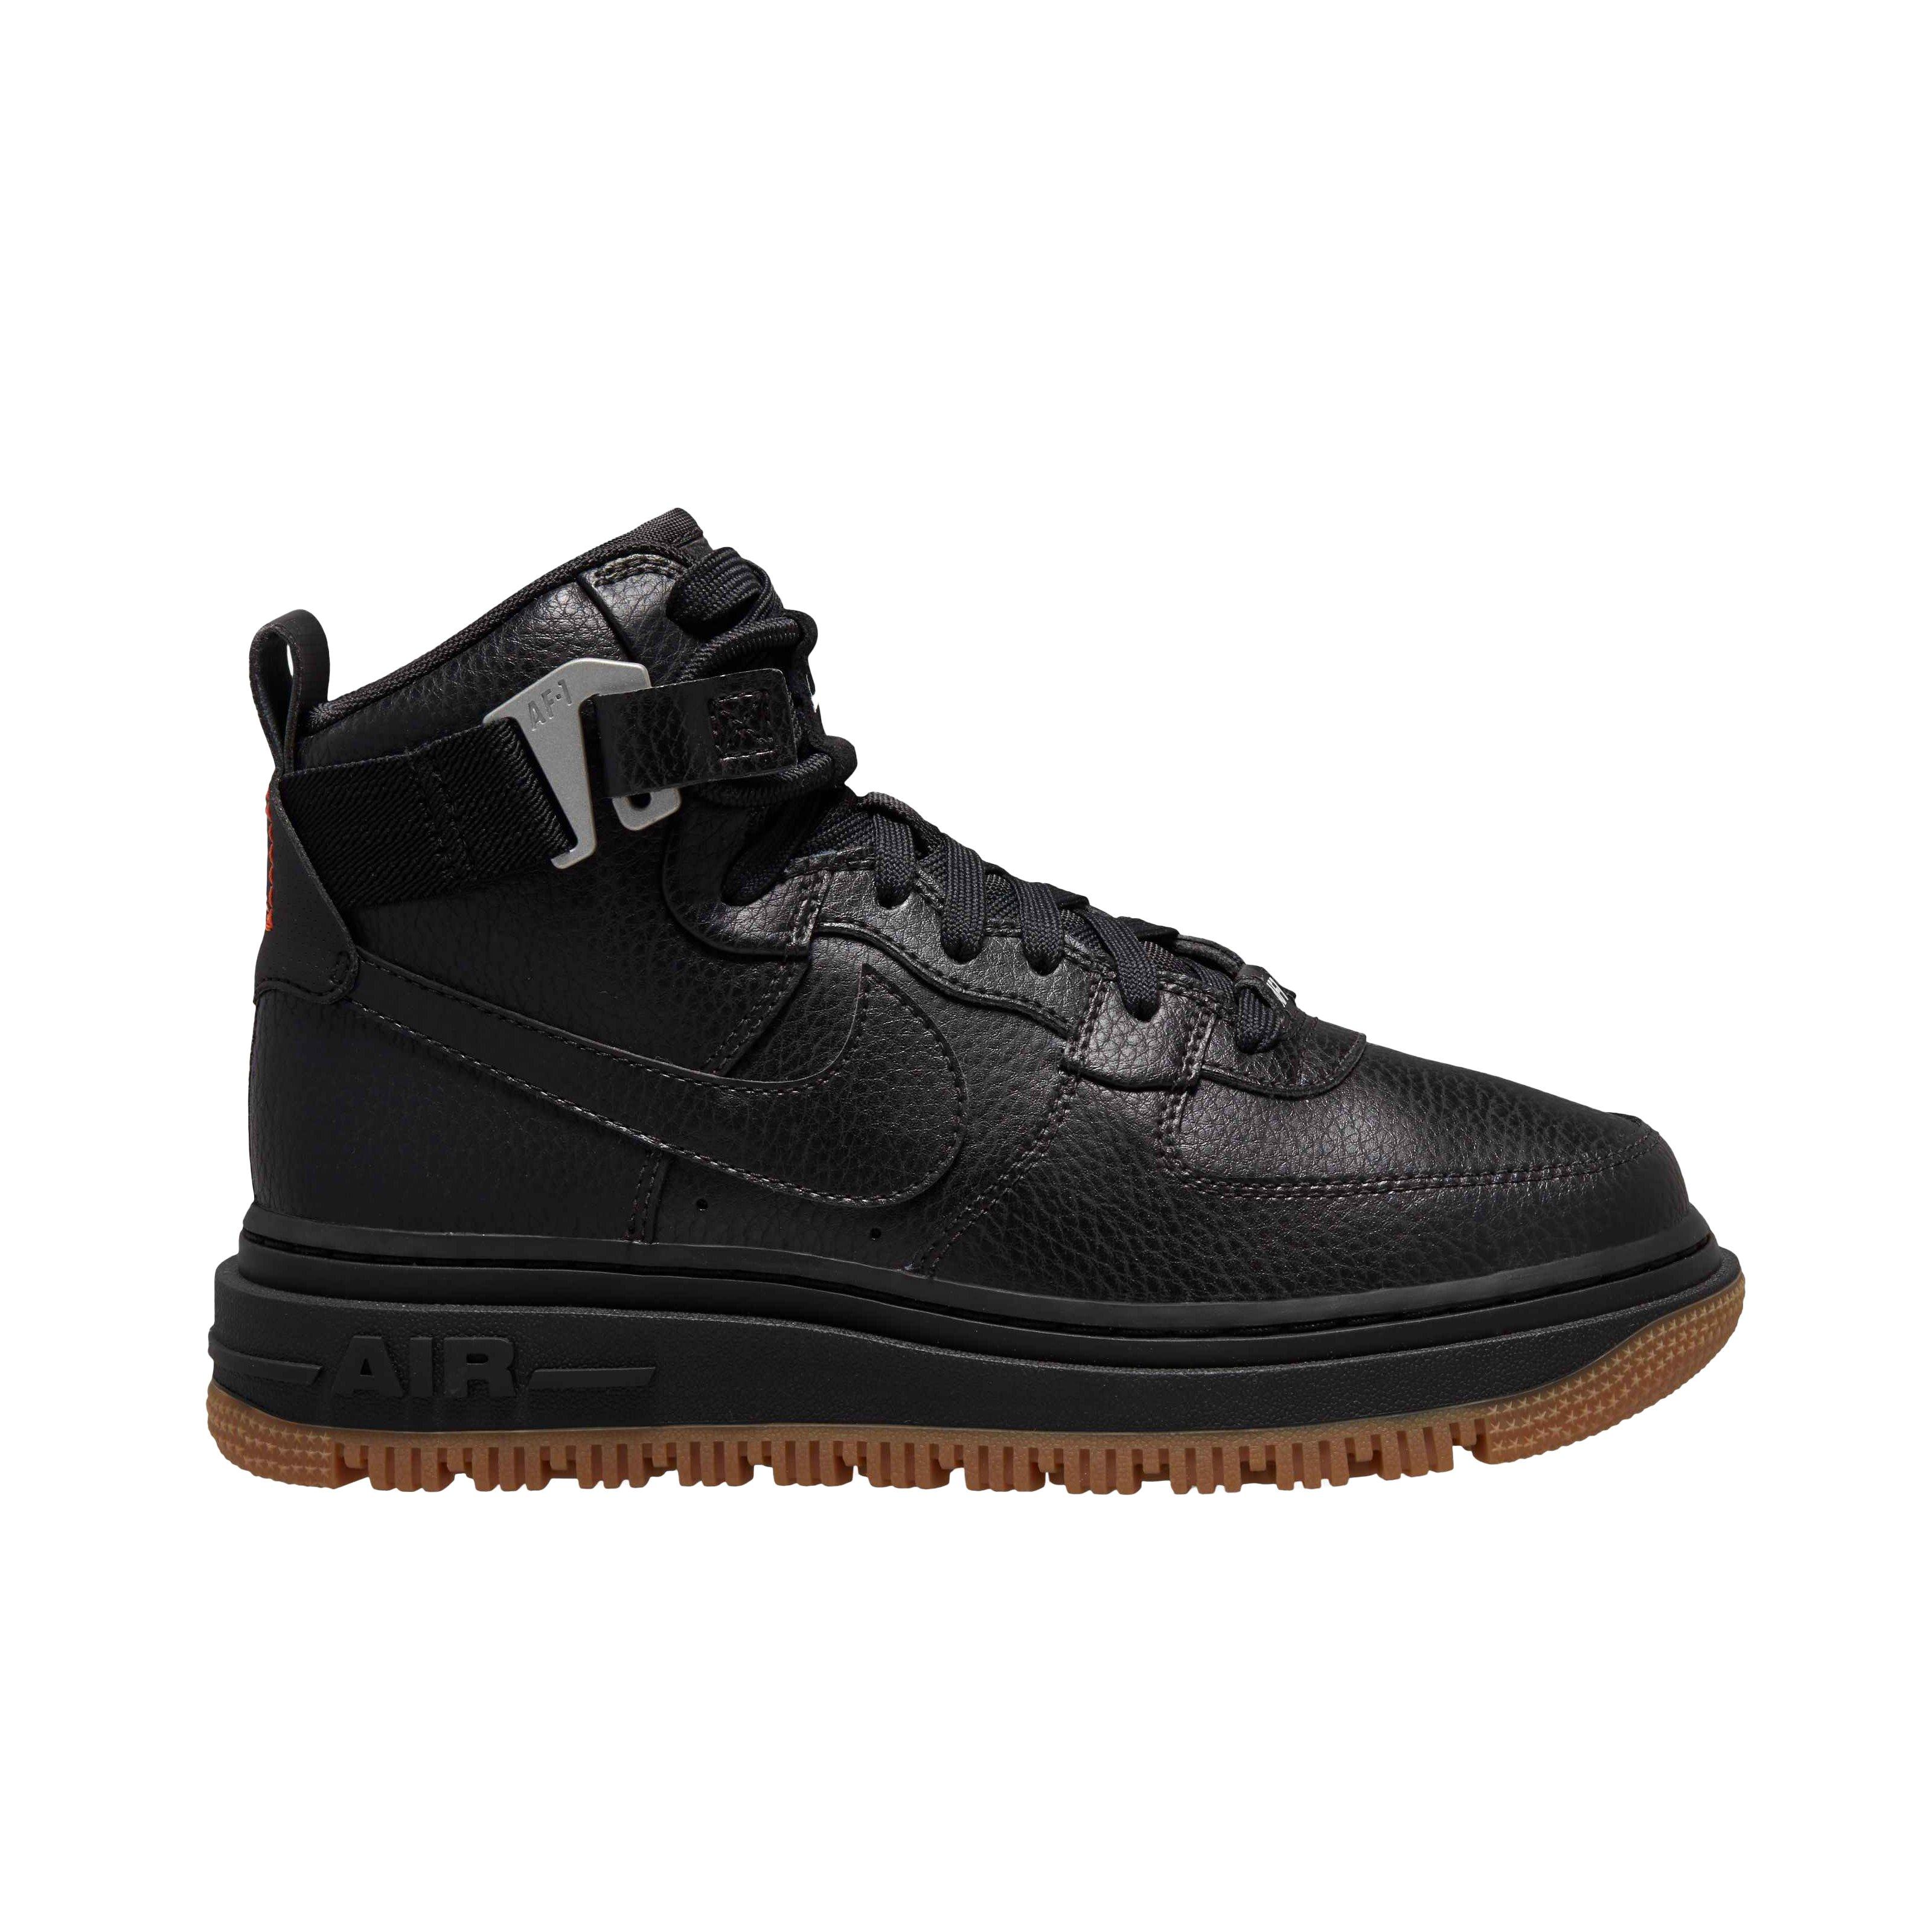 Nike Women's Air Force 1 High Utility 2.0 Boot High-Top Sneakers